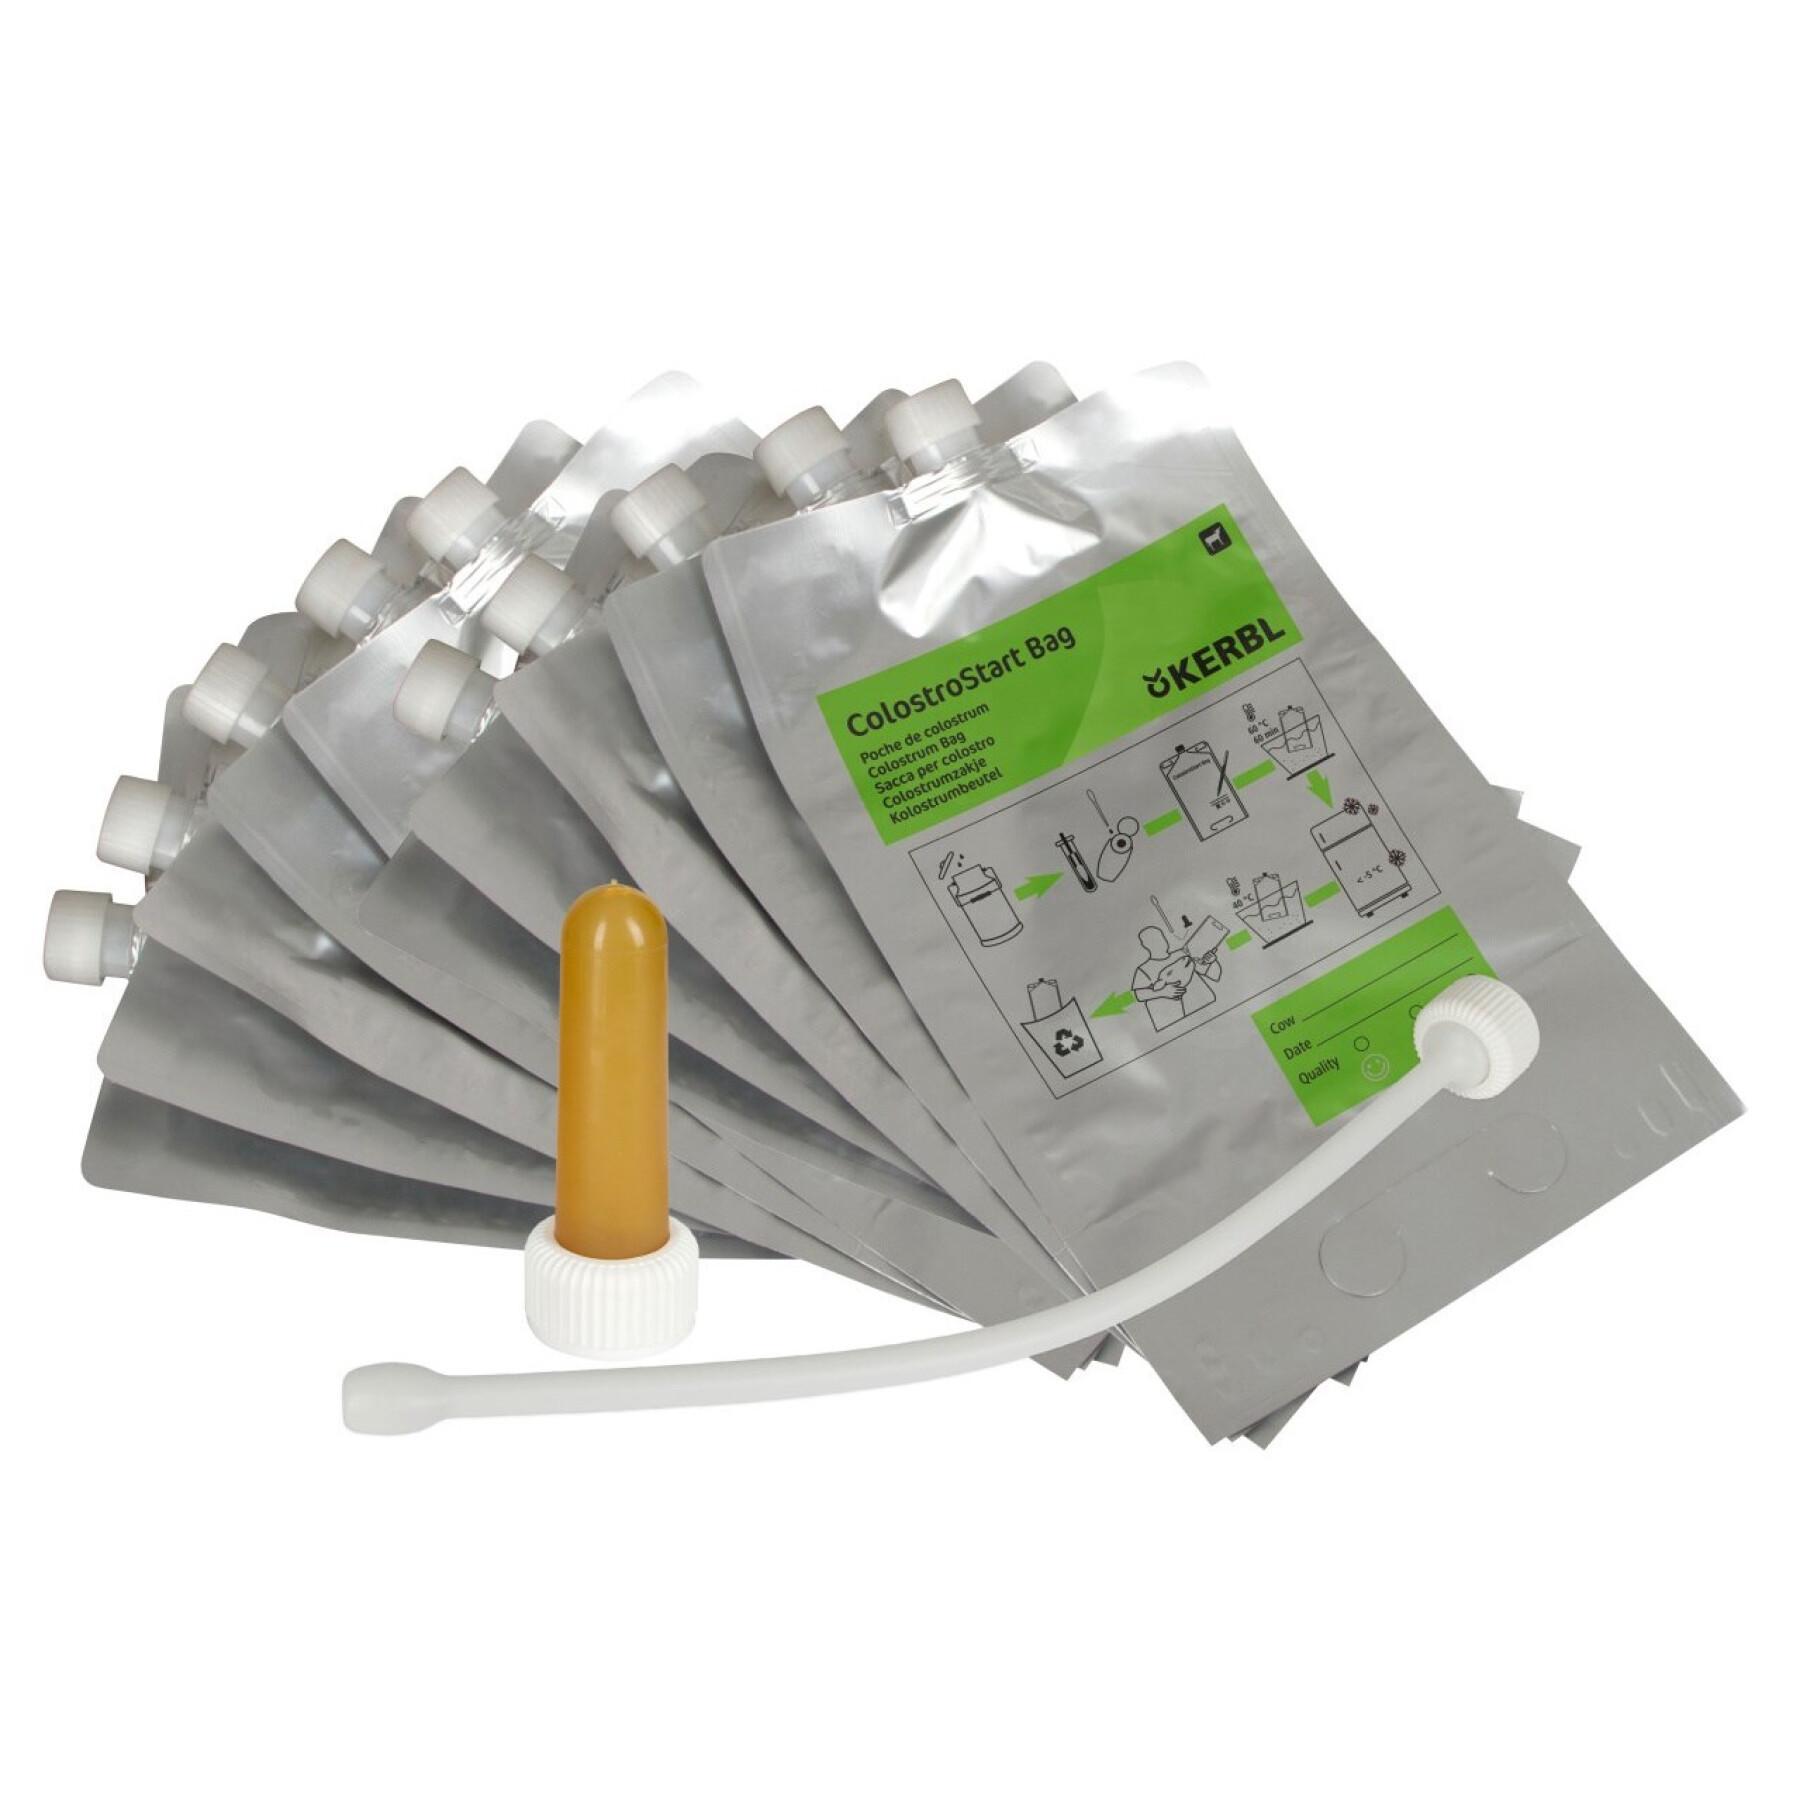 Kit of 50 colostrum bags with 3 teats and 3 probes Kerbl ColostroStart